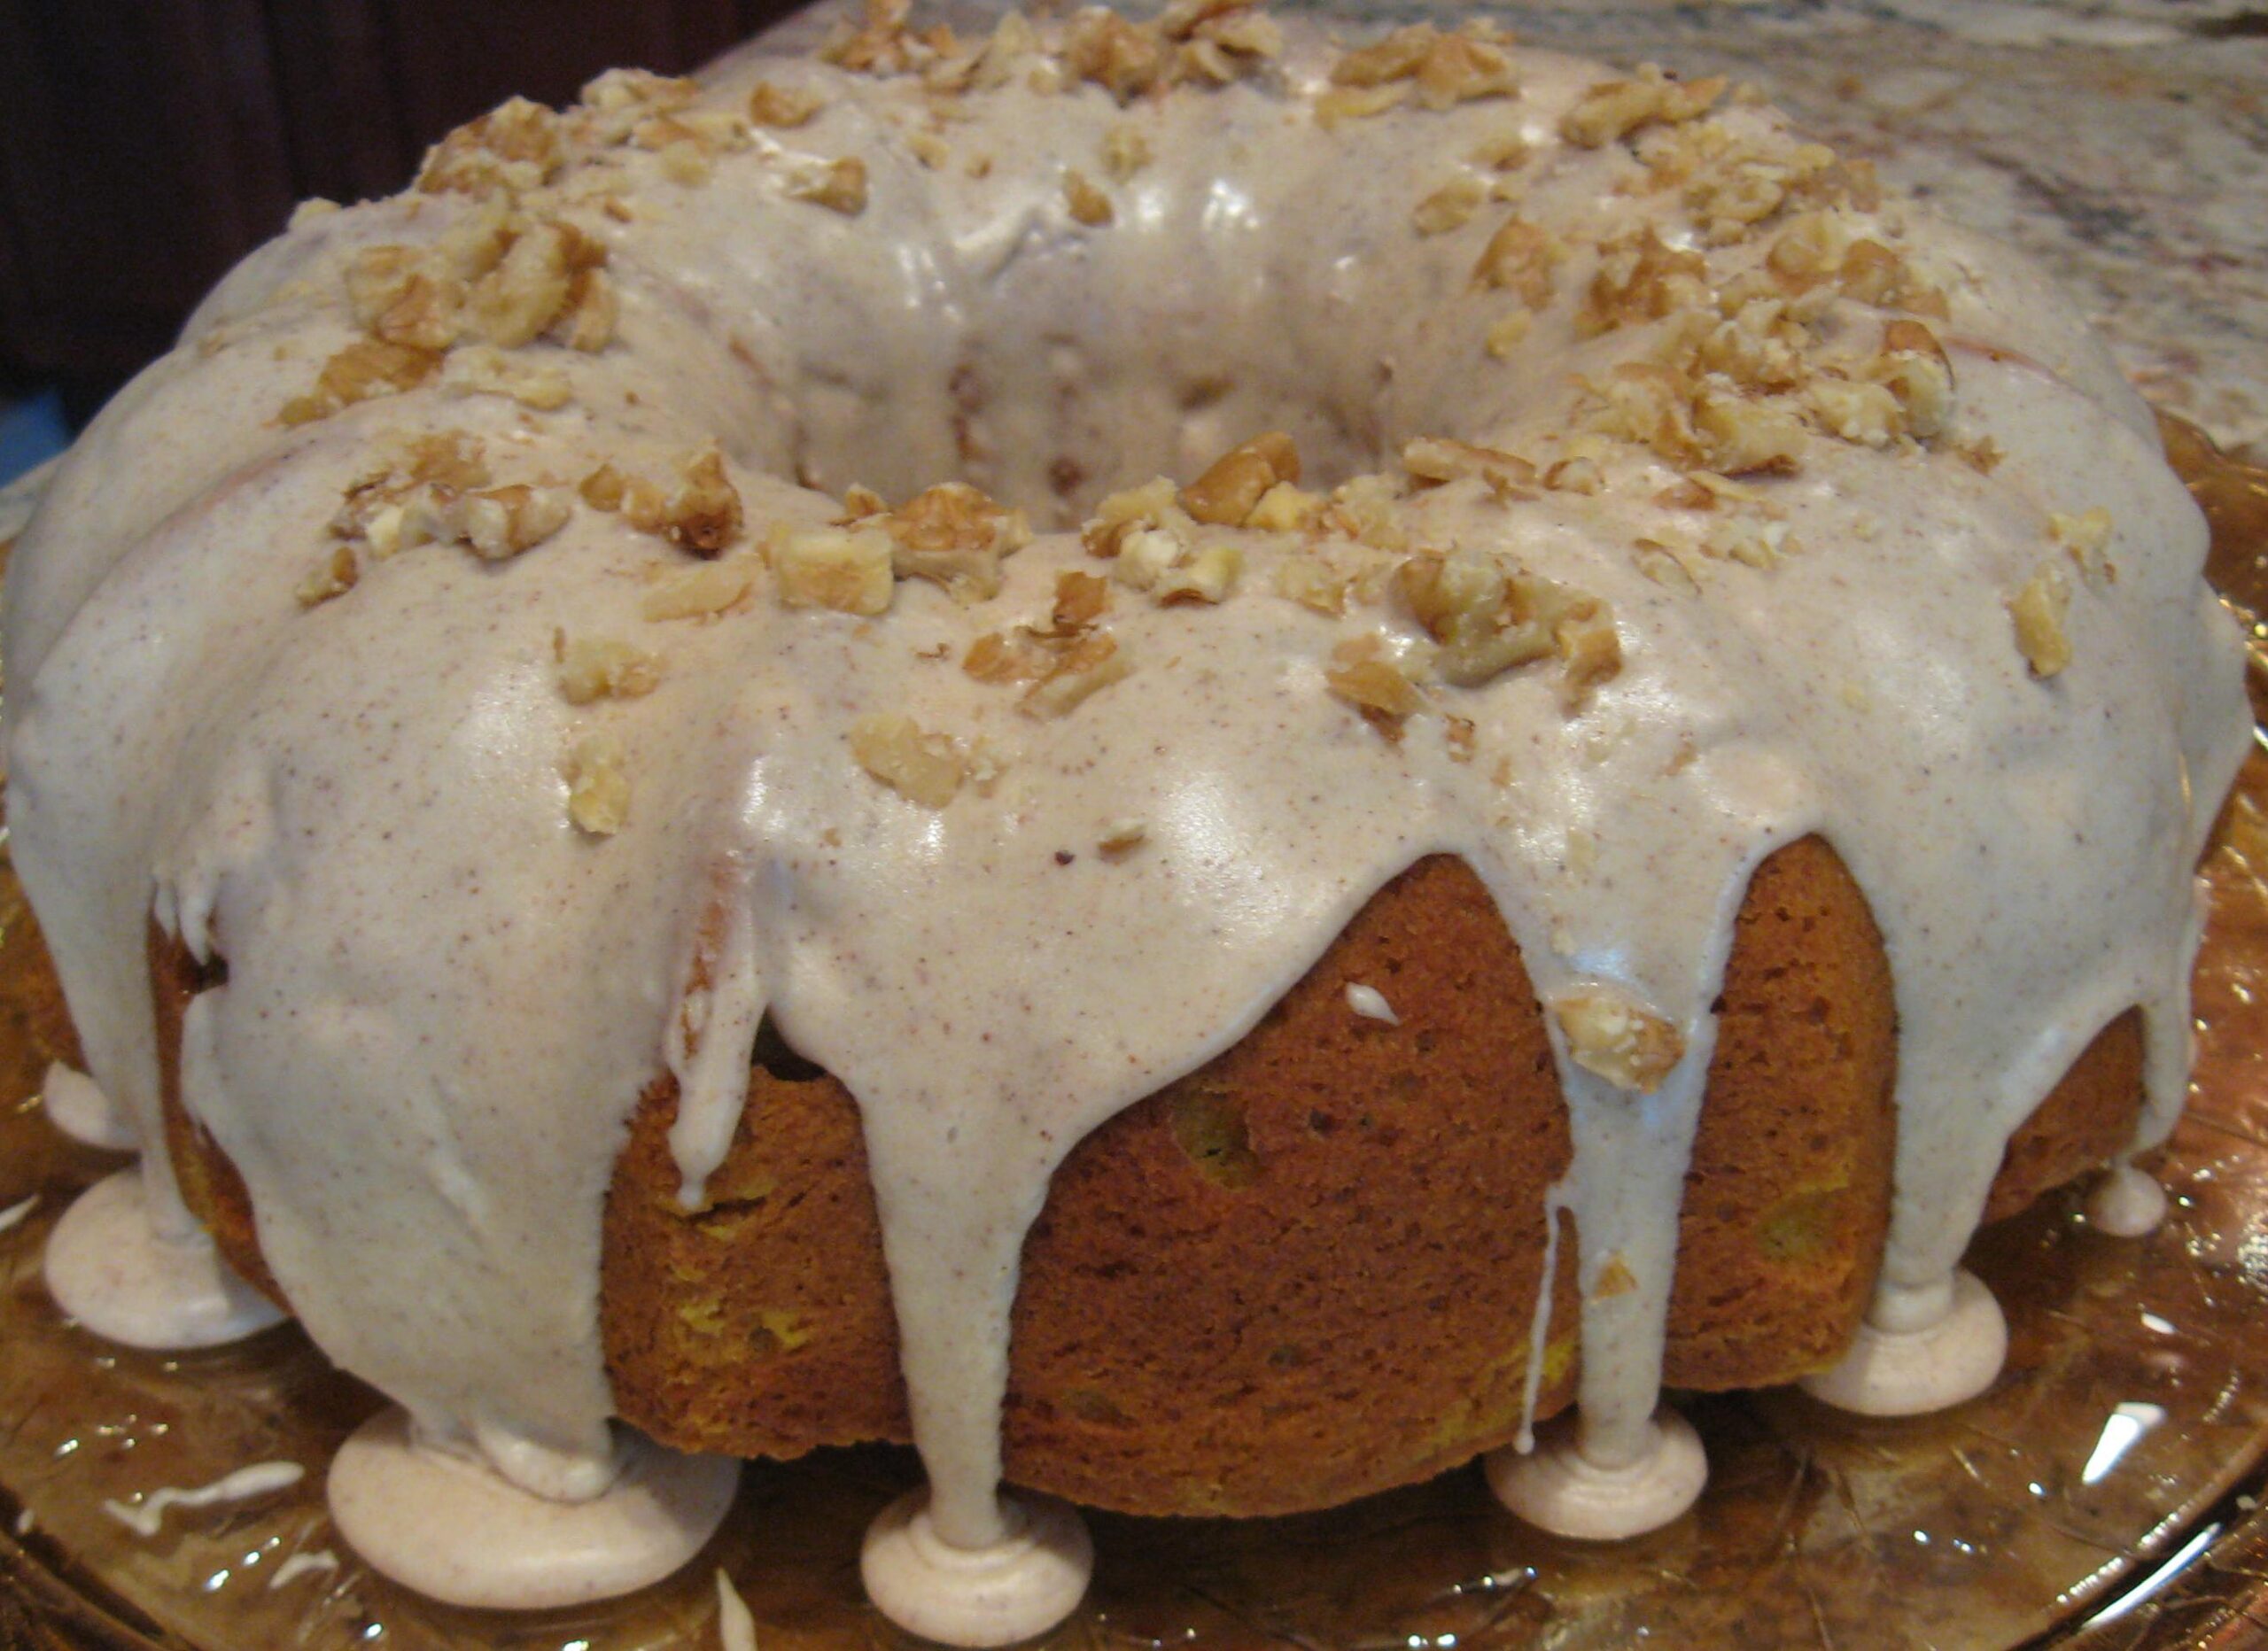  Fall in love with the pumpkin pound cake